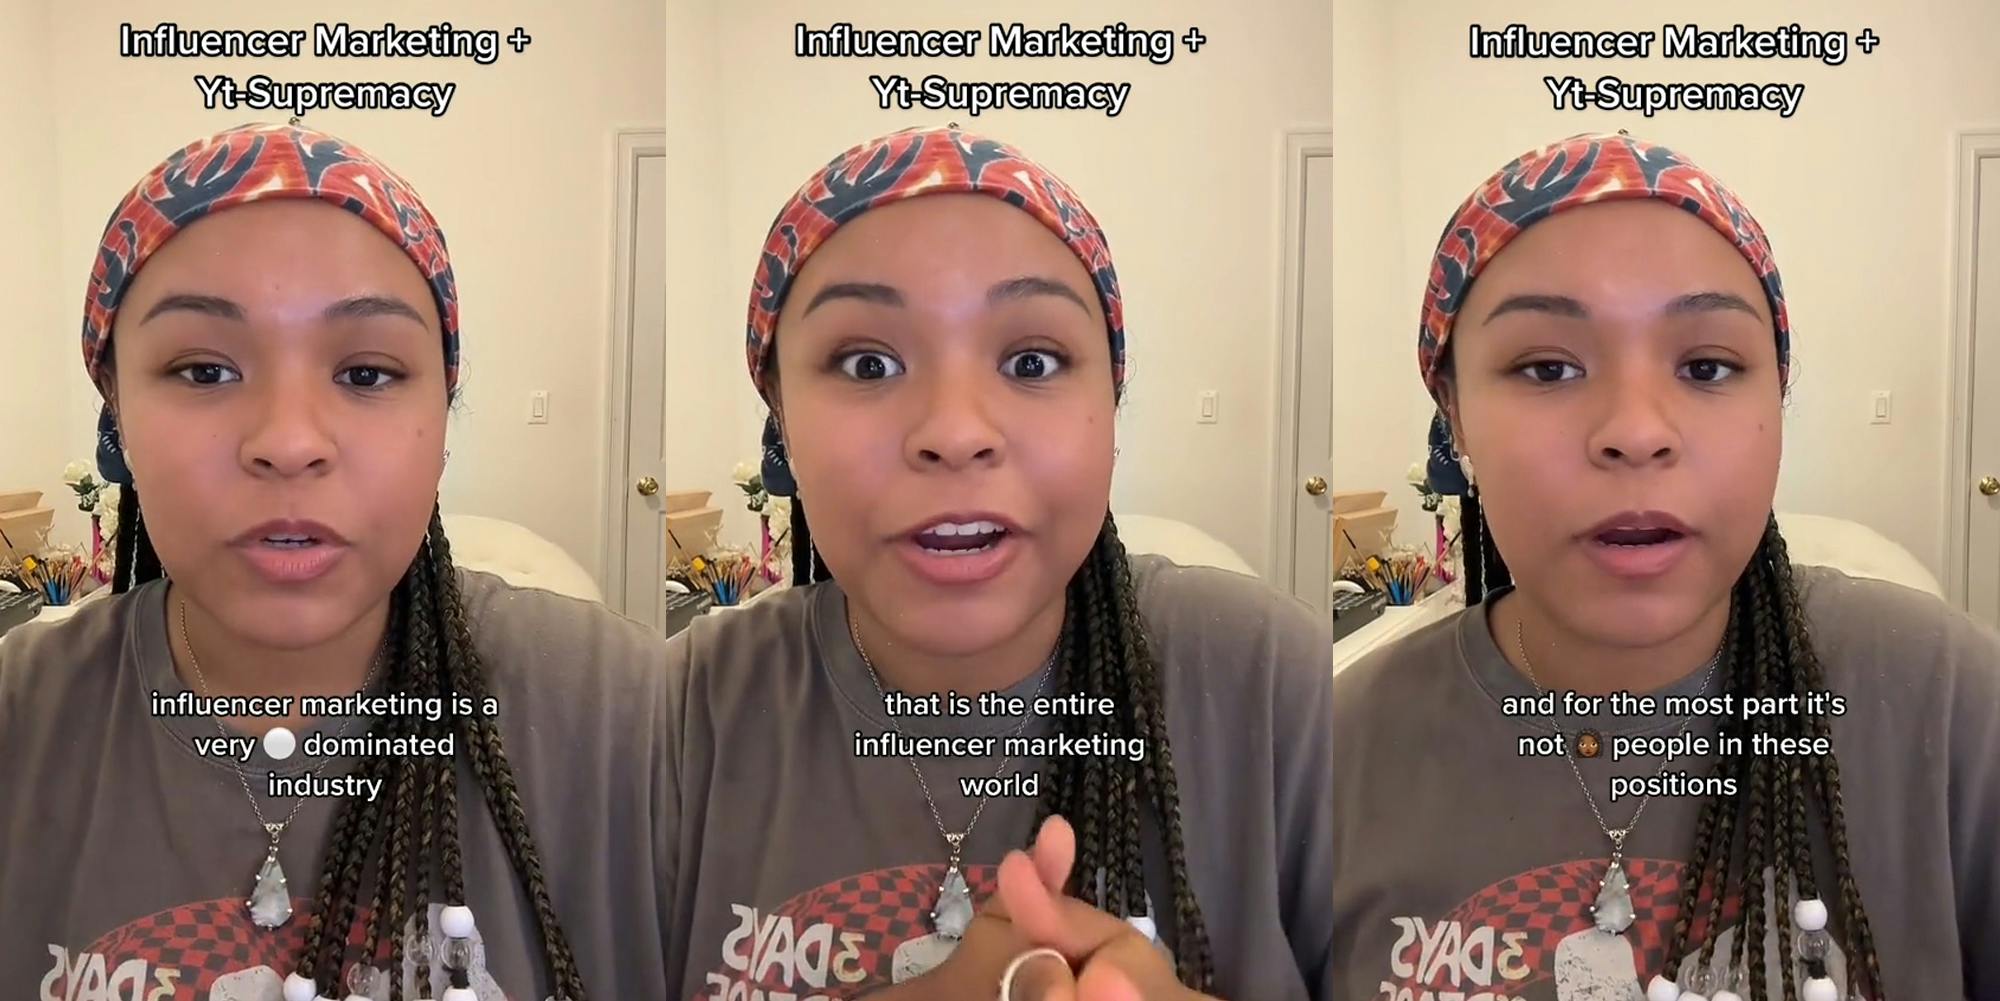 Creator Calls Out Brands for Mostly Working with White Influencers